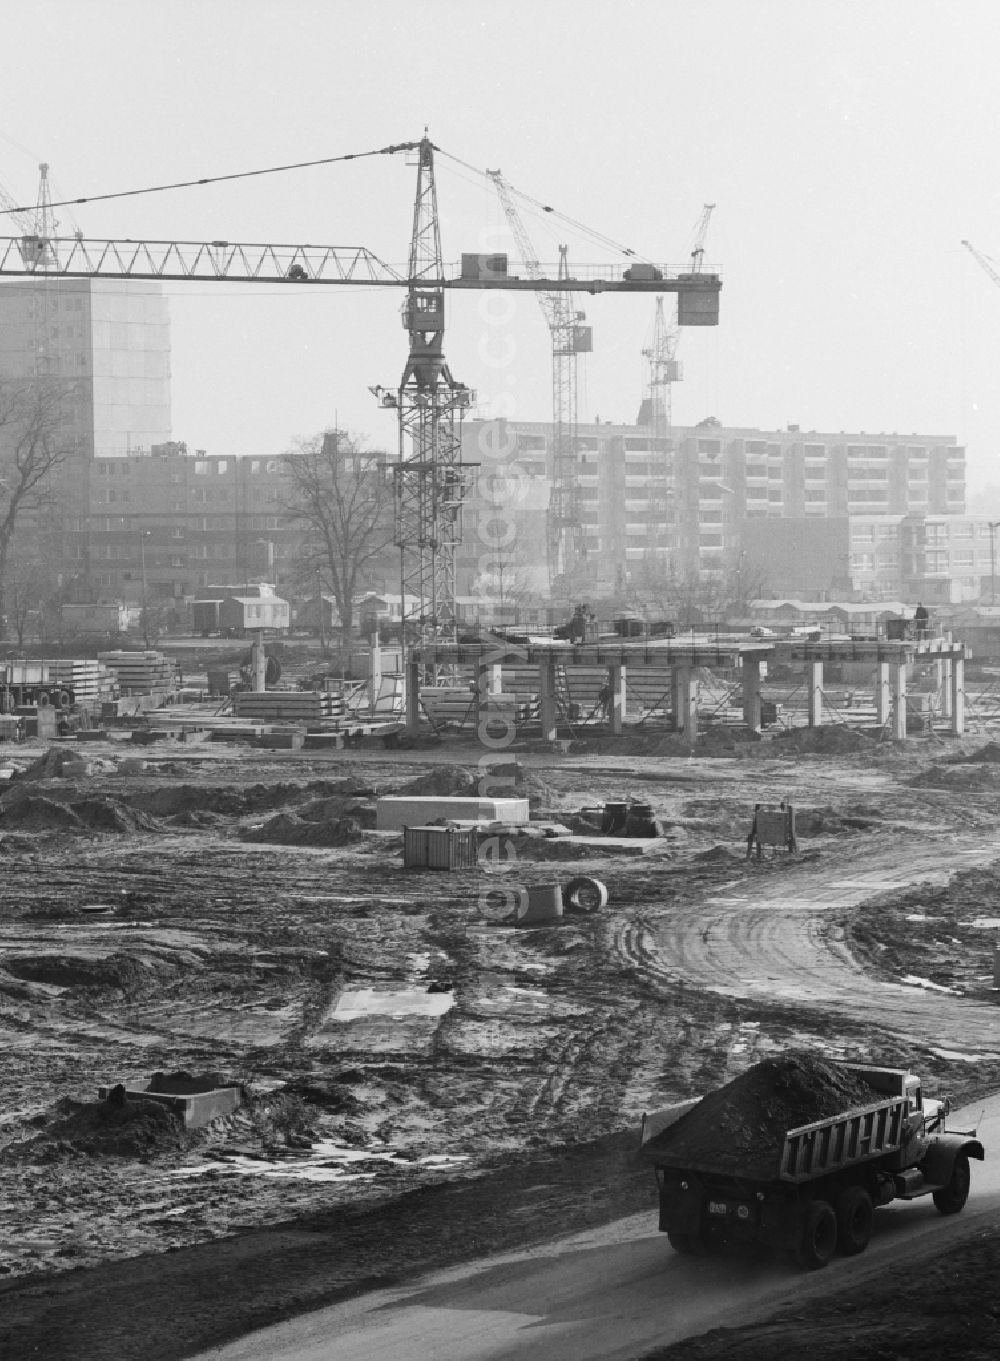 GDR picture archive: Berlin - Construction site in the development area in Berlin Hohenschoenhausen, the former capital of the GDR, the German Democratic Republic